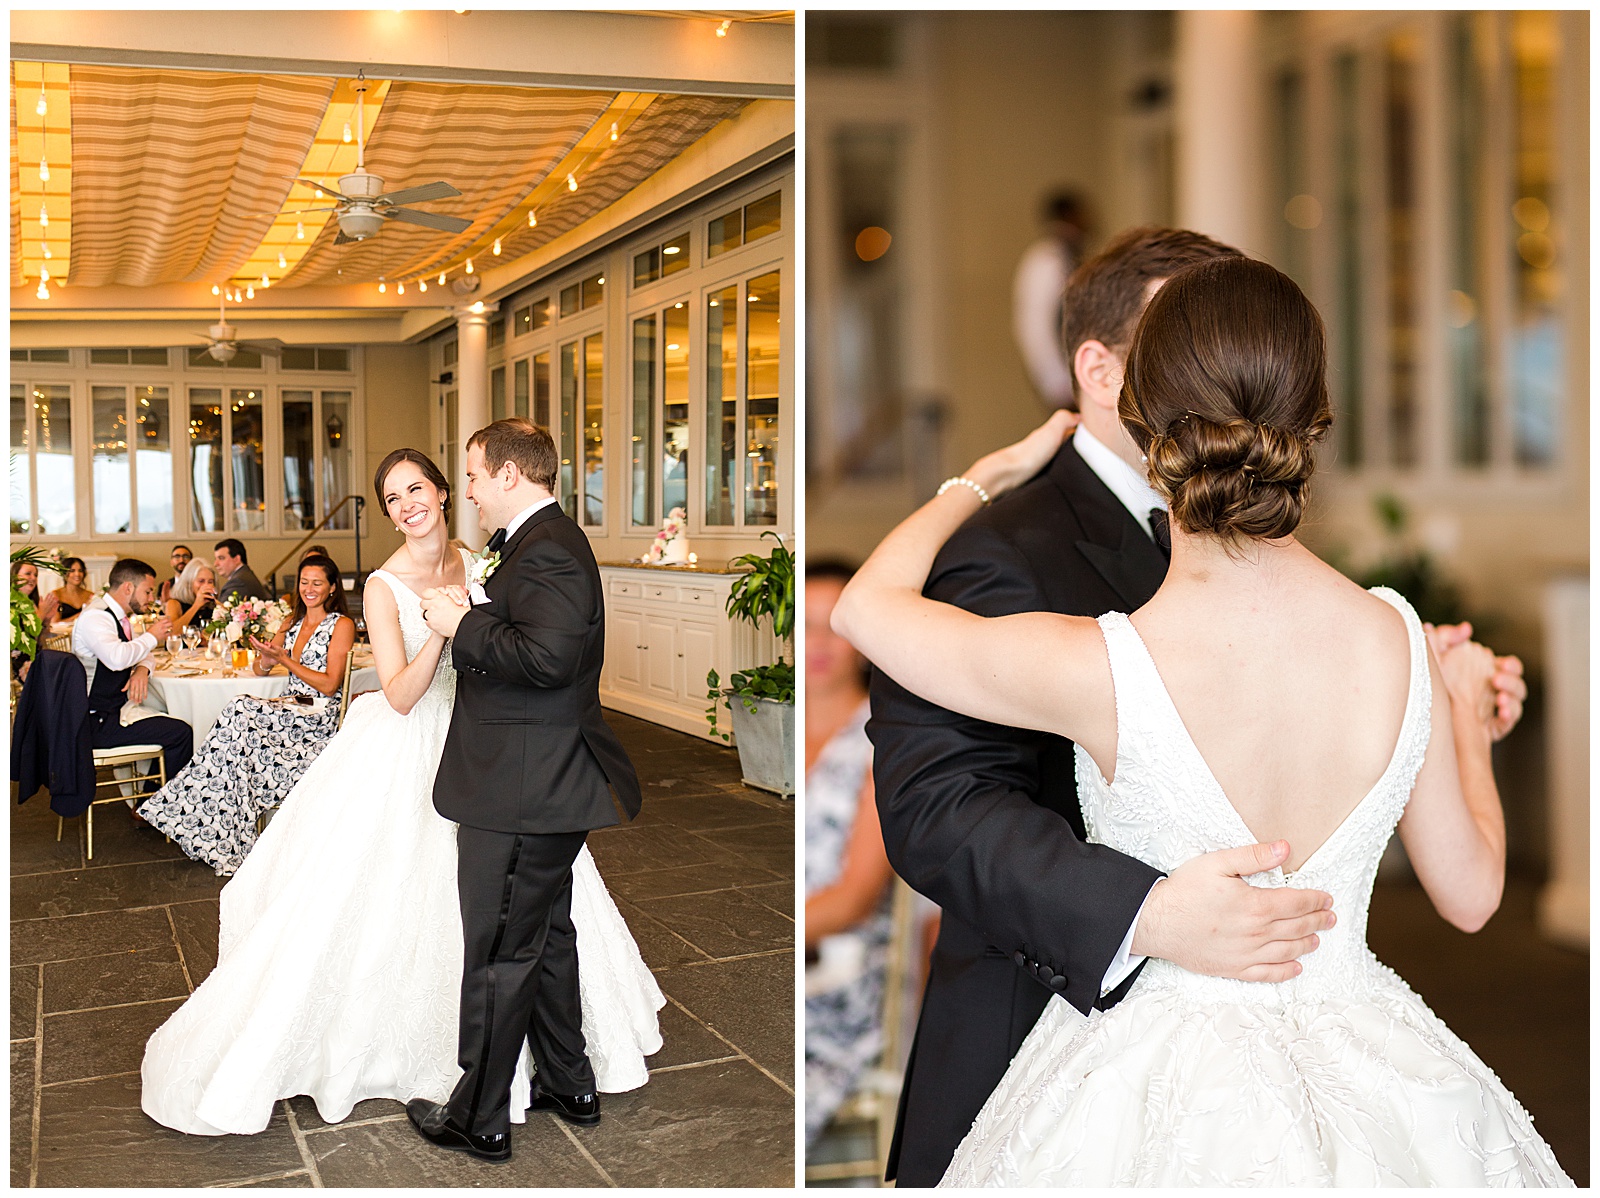 First dance at the Chanler wedding in Newport